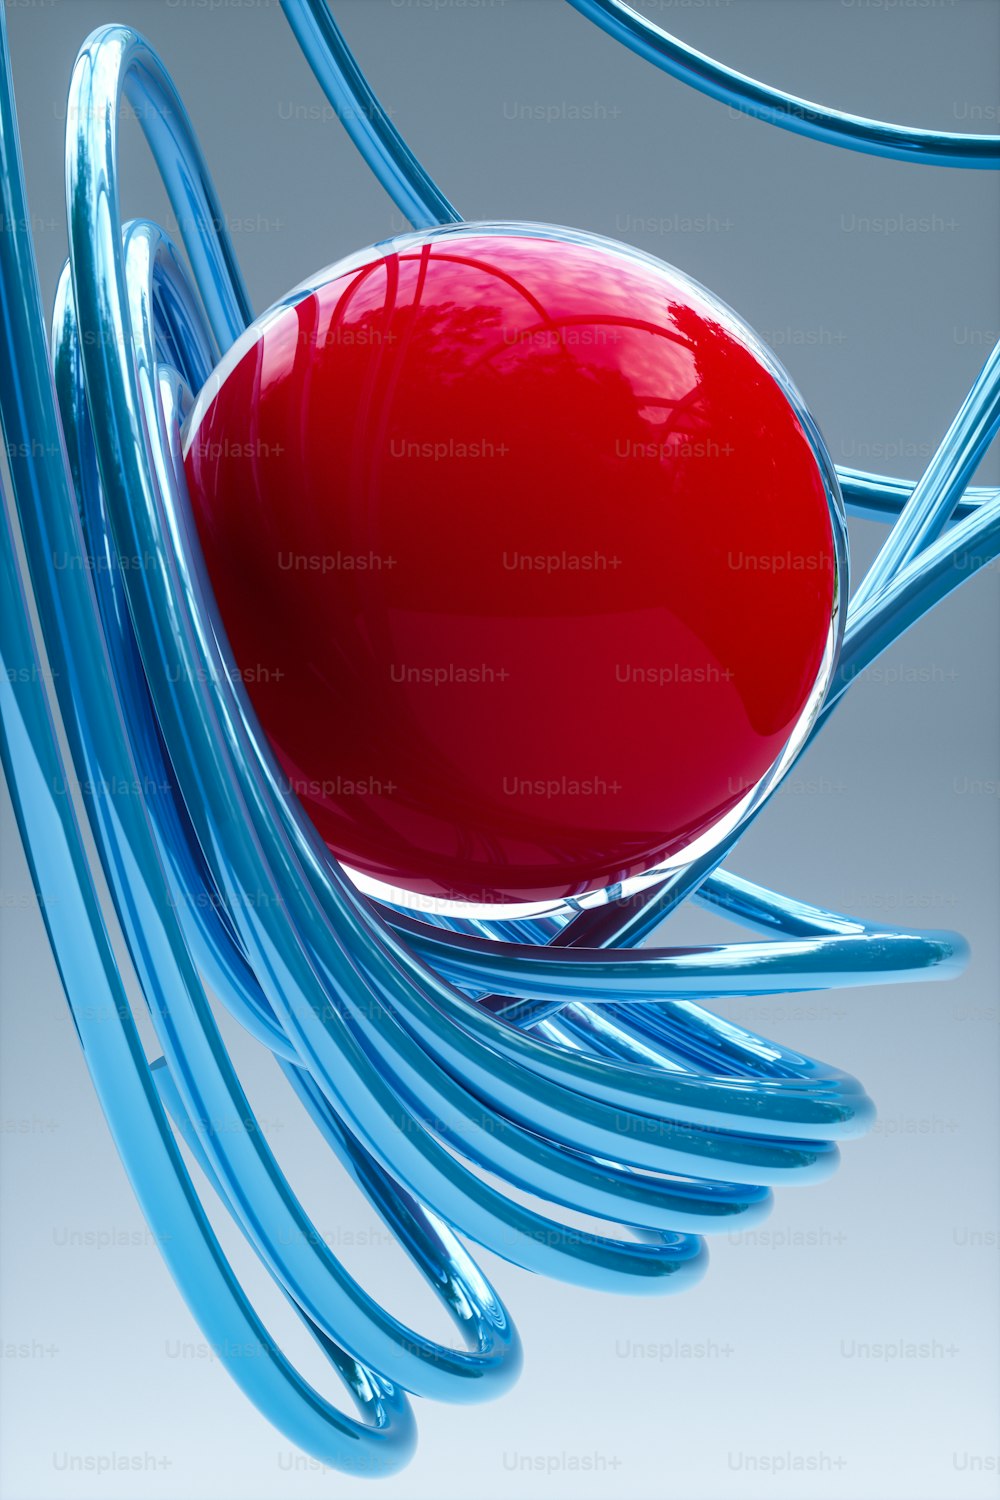 a red object sitting on top of a blue object